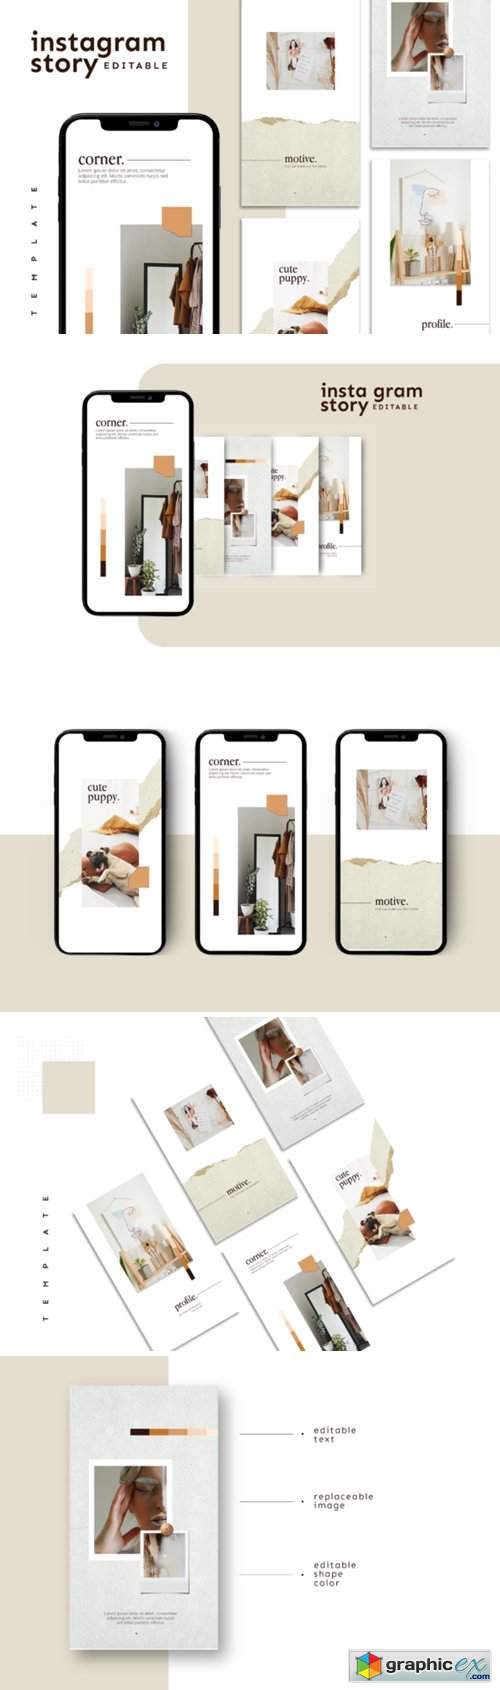  Instagram Story Template 3884586 